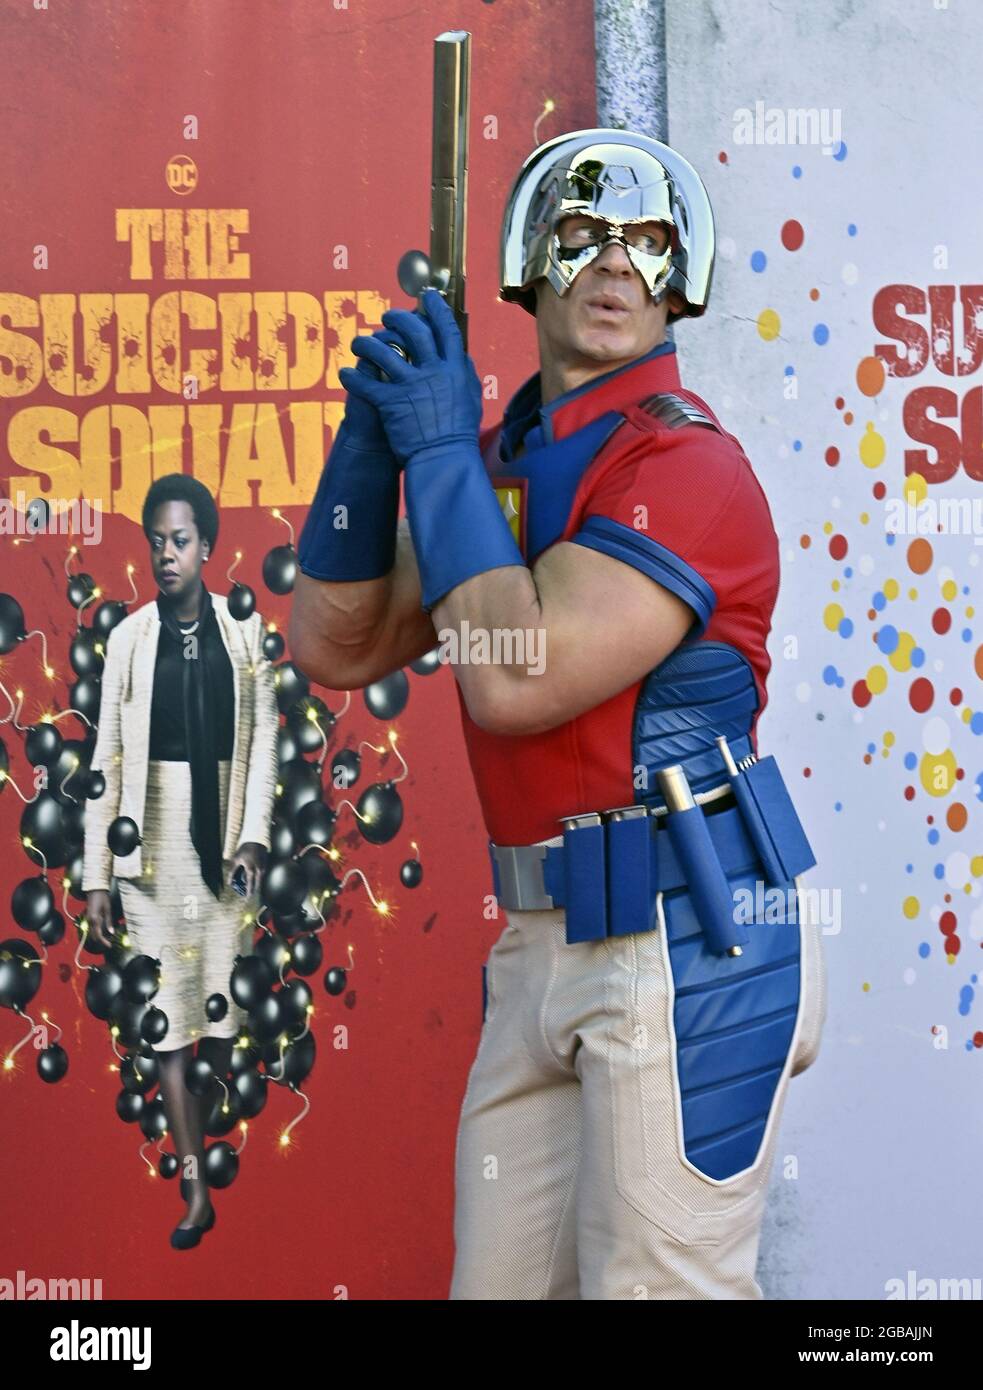 Los Angeles, United States. 03rd Aug, 2021. Cast member John Cena attends the premiere of the sci-fi motion picture comedy 'The Suicide Squad' at the Regency Village Theatre in the Westwood section of Los Angeles on Monday, August 2, 2021. Storyline: Supervillains Harley Quinn, Bloodsport, Peacemaker and a collection of nutty cons at Belle Reve prison join the super-secret, super-shady Task Force X as they are dropped off at the remote, enemy-infused island of Corto Maltese. Photo by Jim Ruymen/UPI Credit: UPI/Alamy Live News Stock Photo